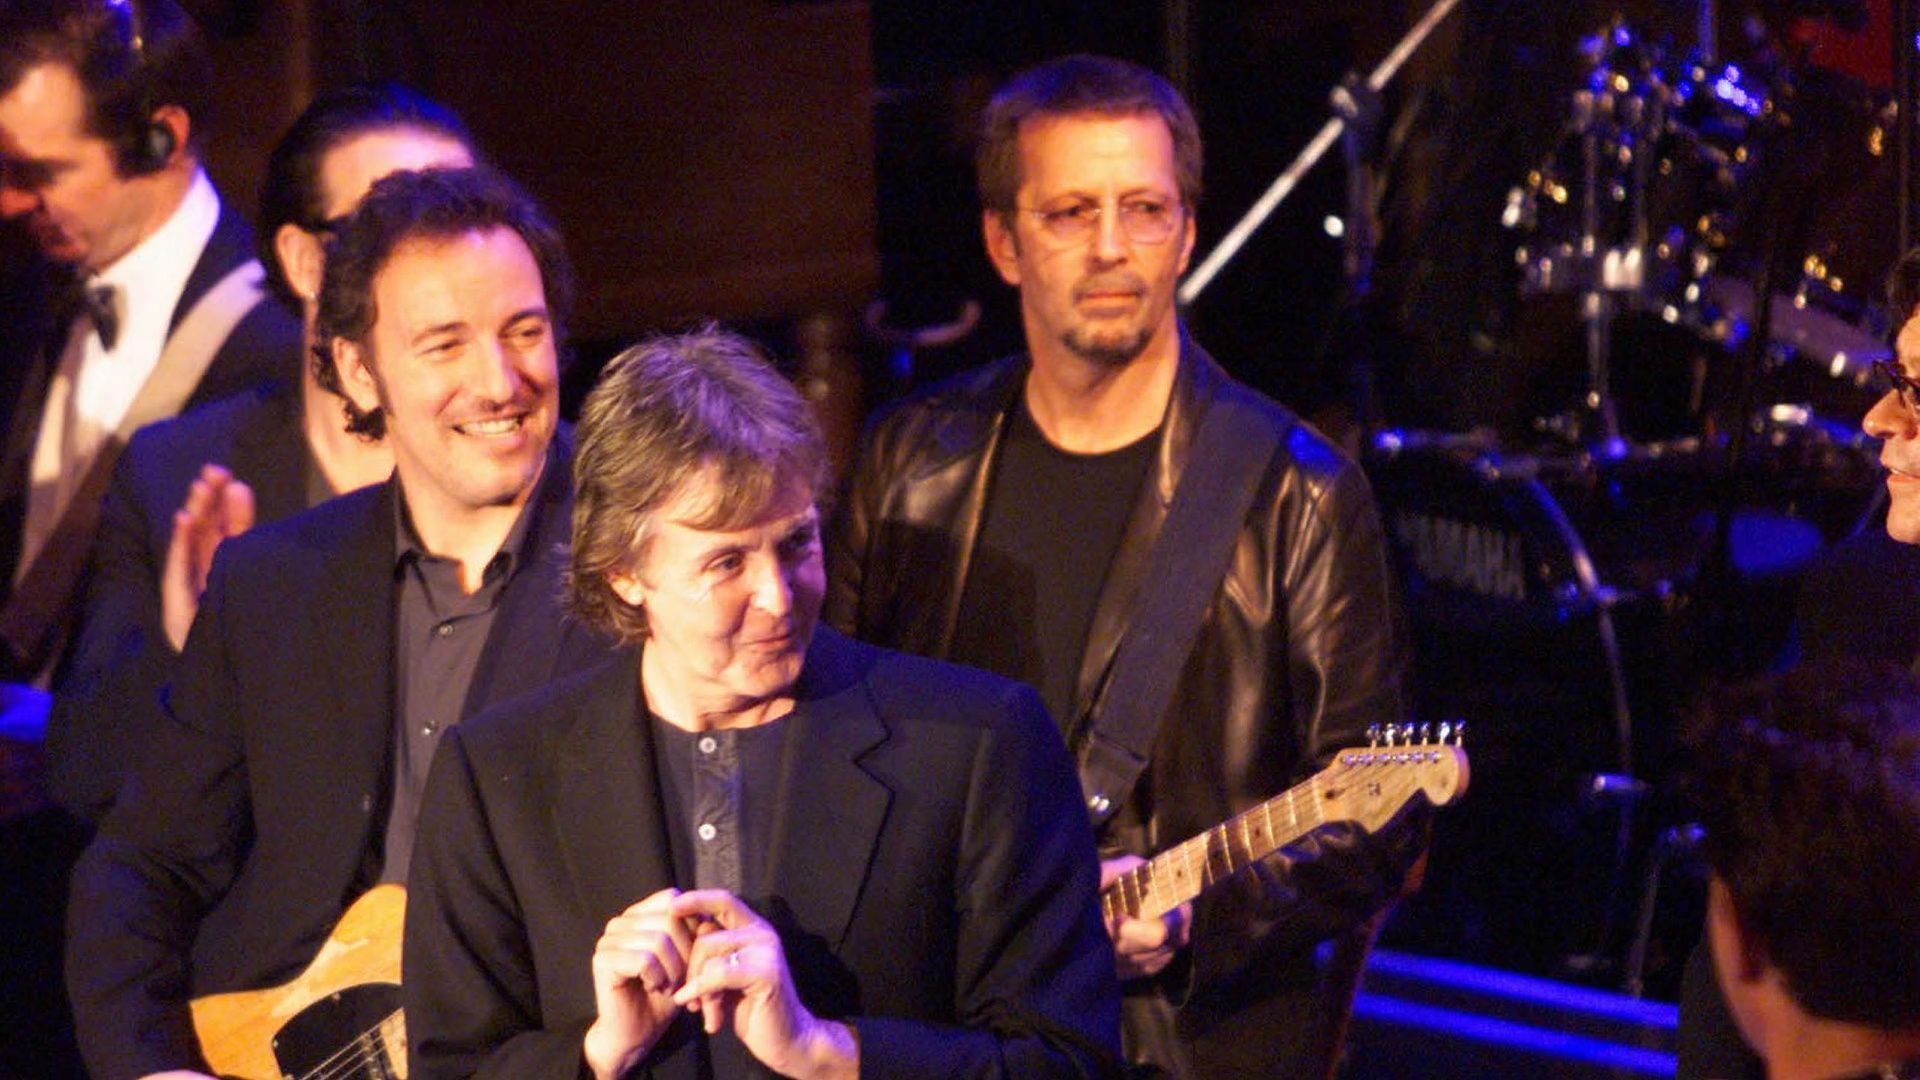 Paul McCartney and Eric Clapton join forces to help sick folk rocker